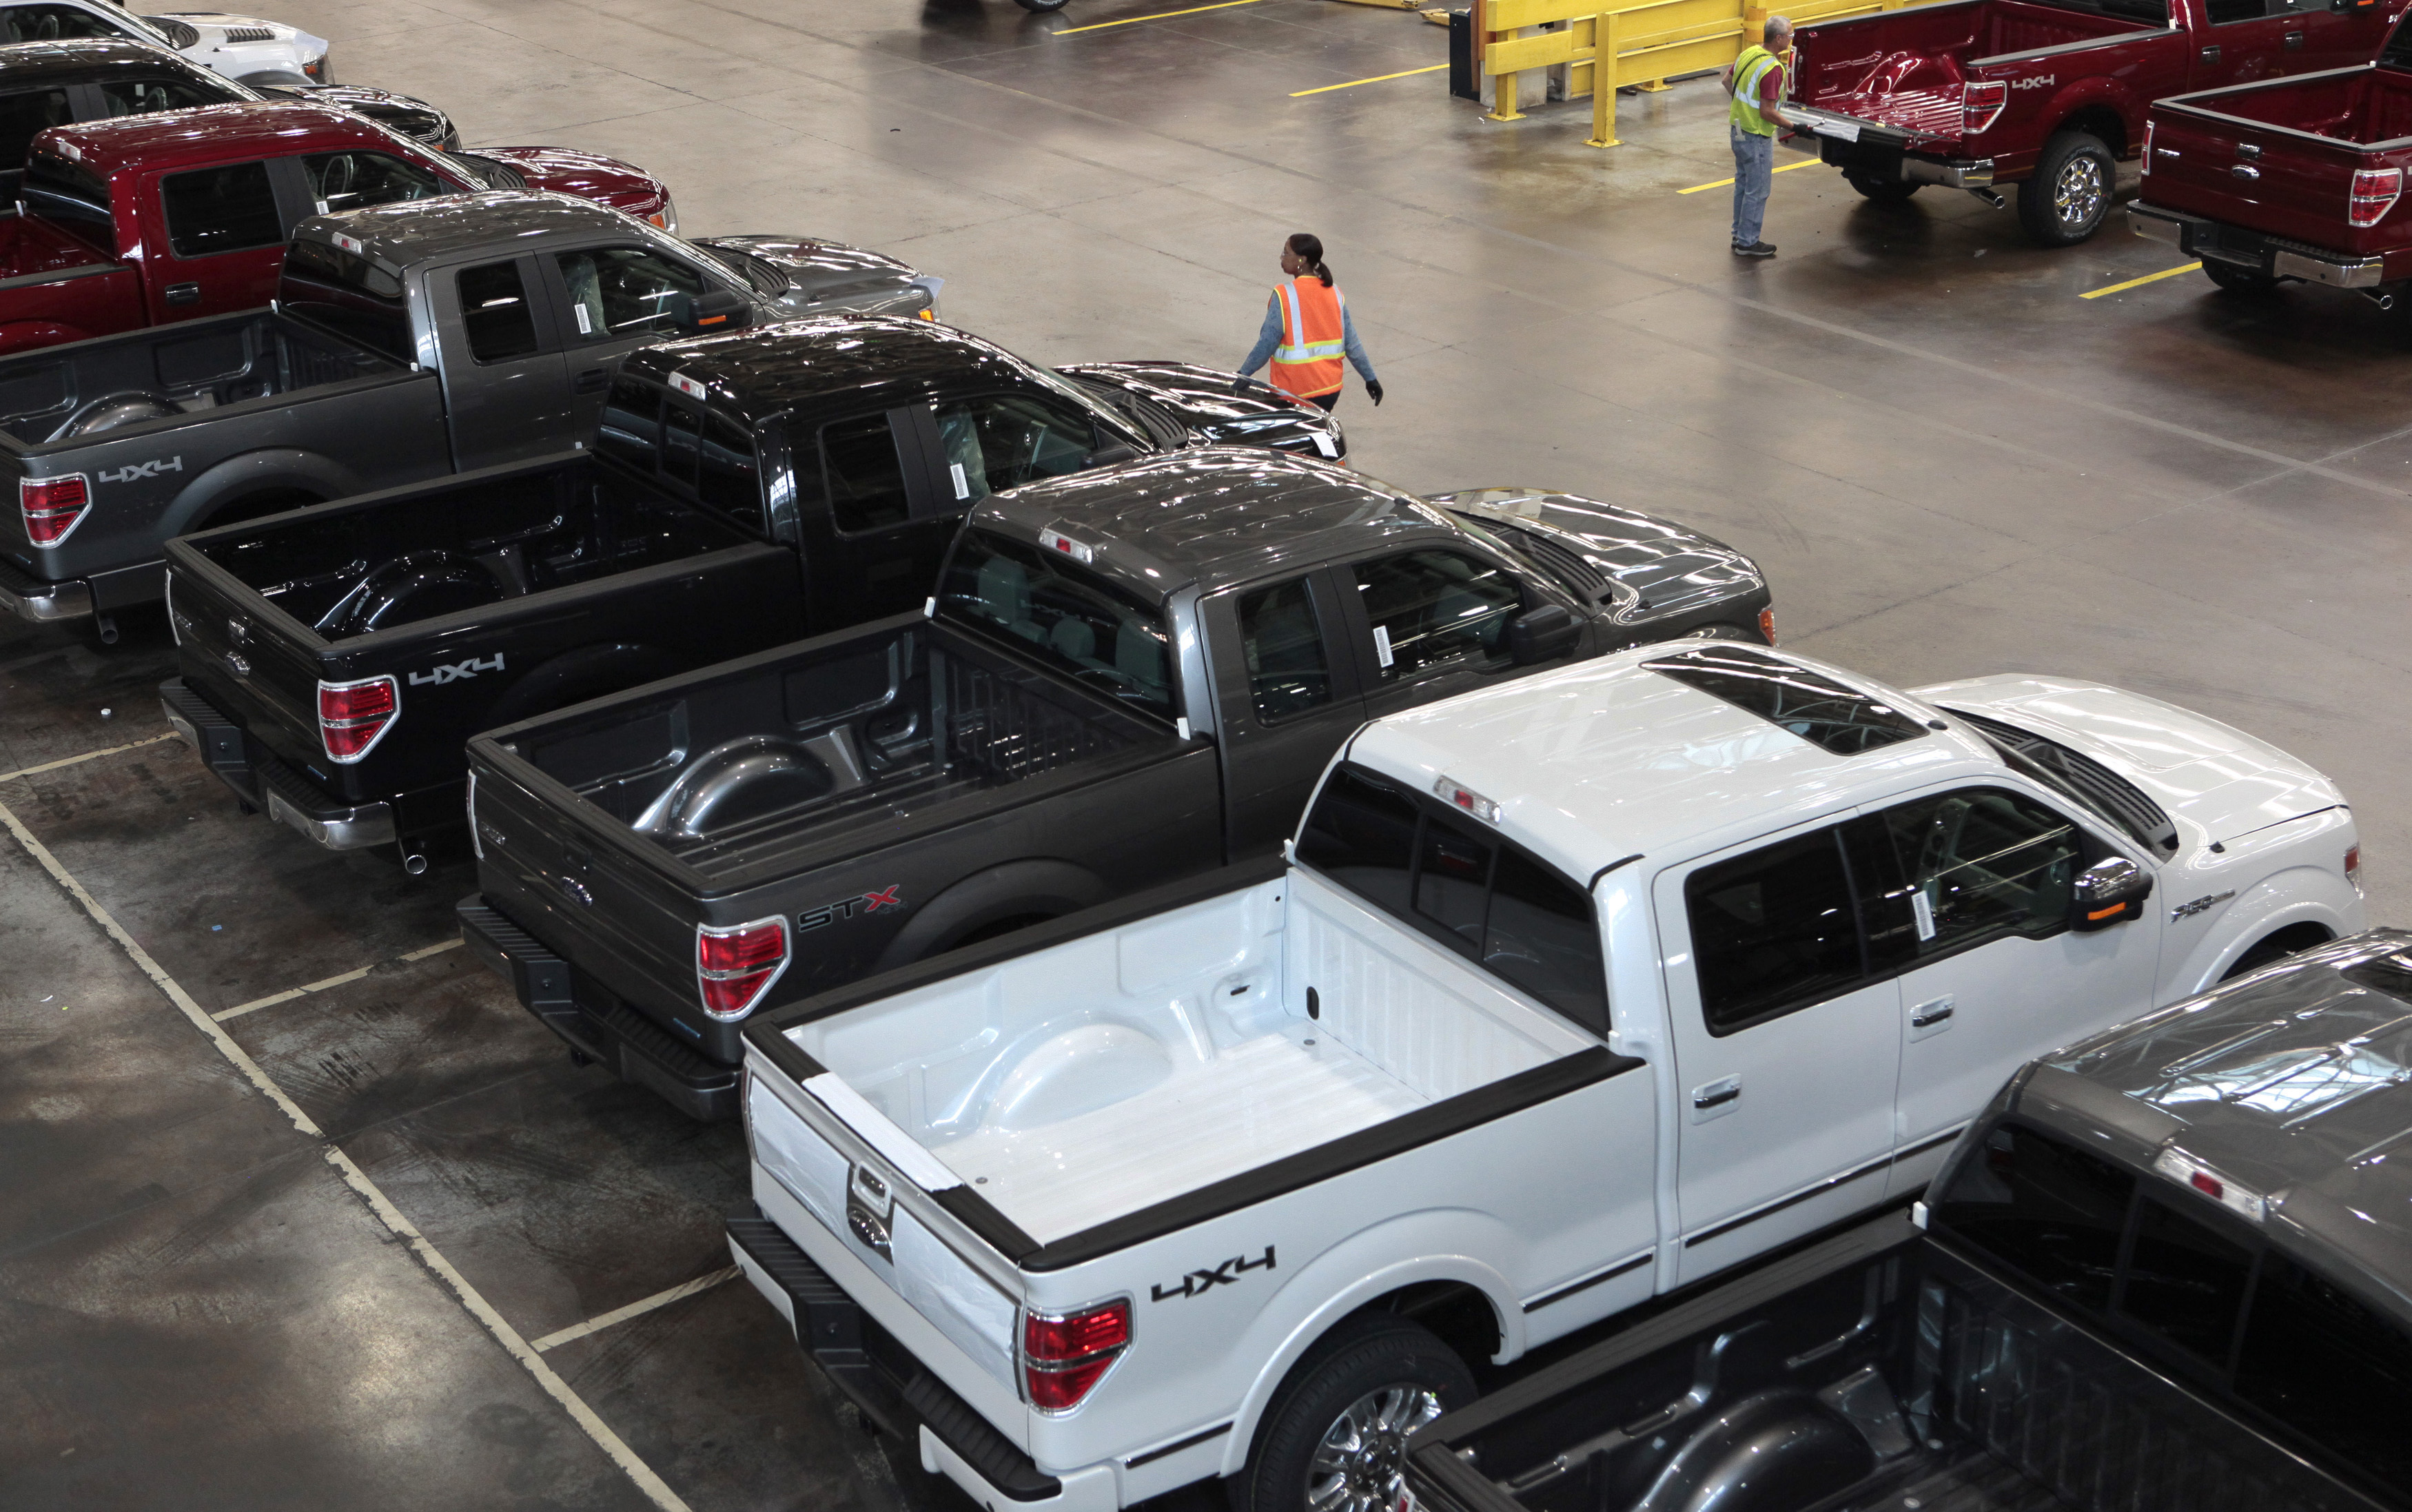 2014 Ford F-150 pick-up trucks are seen inside the plant at the Ford Motor Dearborn Truck Plant in Dearborn, Michigan